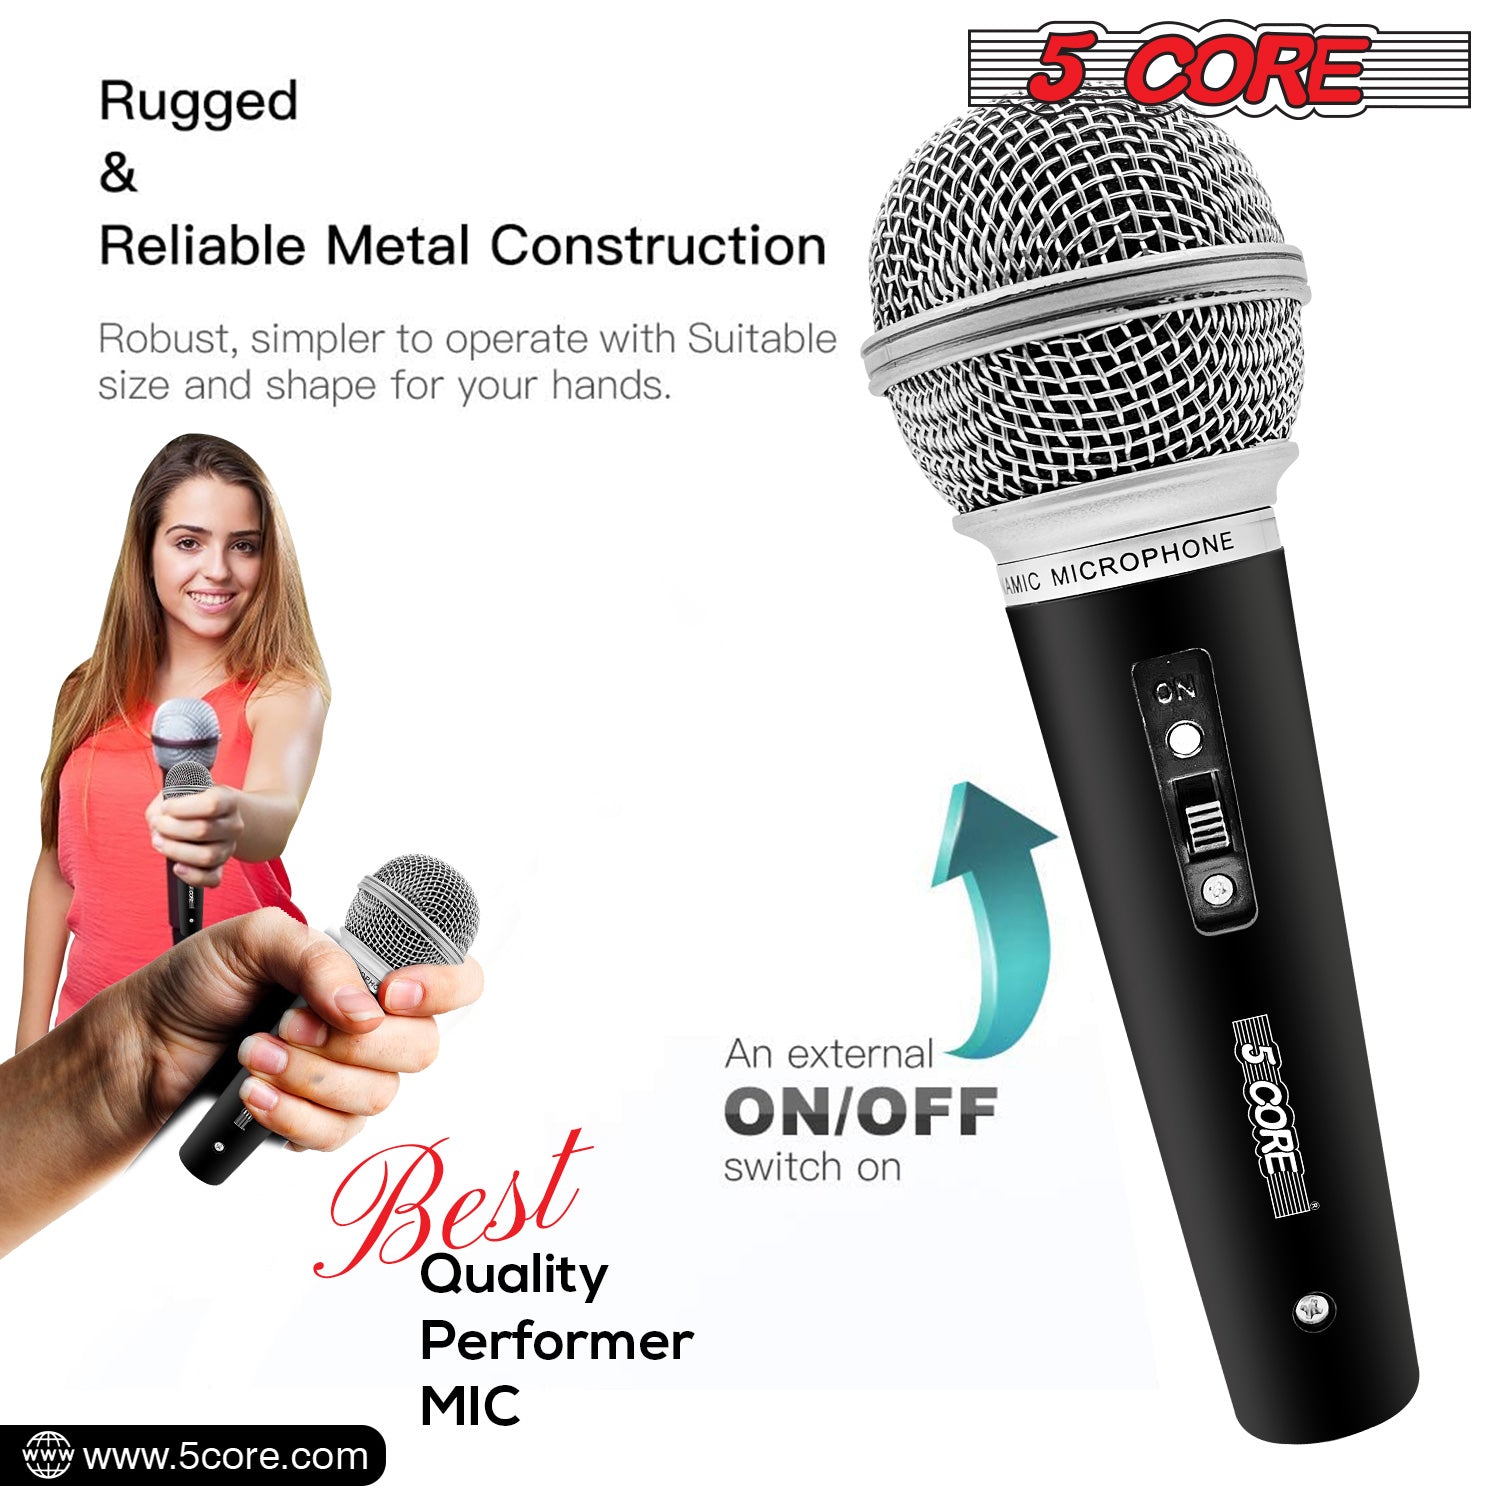 5 Core Karaoke Microphone Dynamic Vocal Handheld Mic Cardioid Unidirectional Microfono w On and Off Switch Includes XLR Audio Cable for Singing, Public Speaking & Parties -PM 58